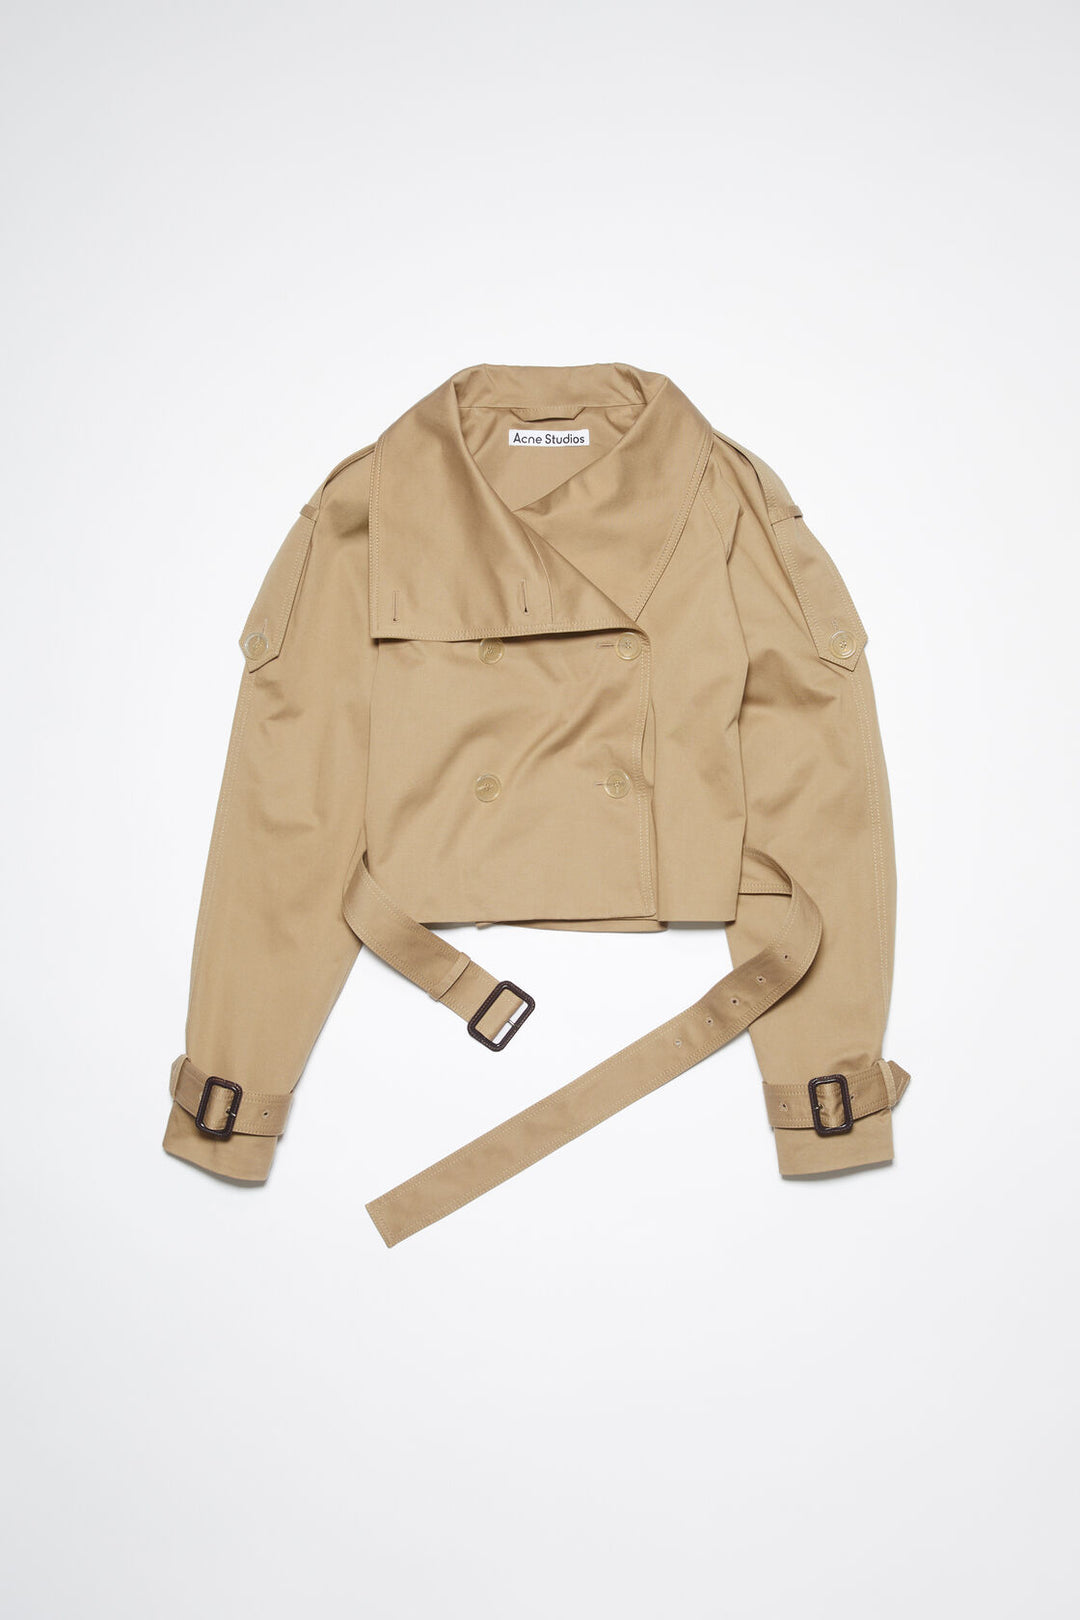 ACNE STUDIOS - DOUBLE-BREASTED TRENCH JACKET - Dale